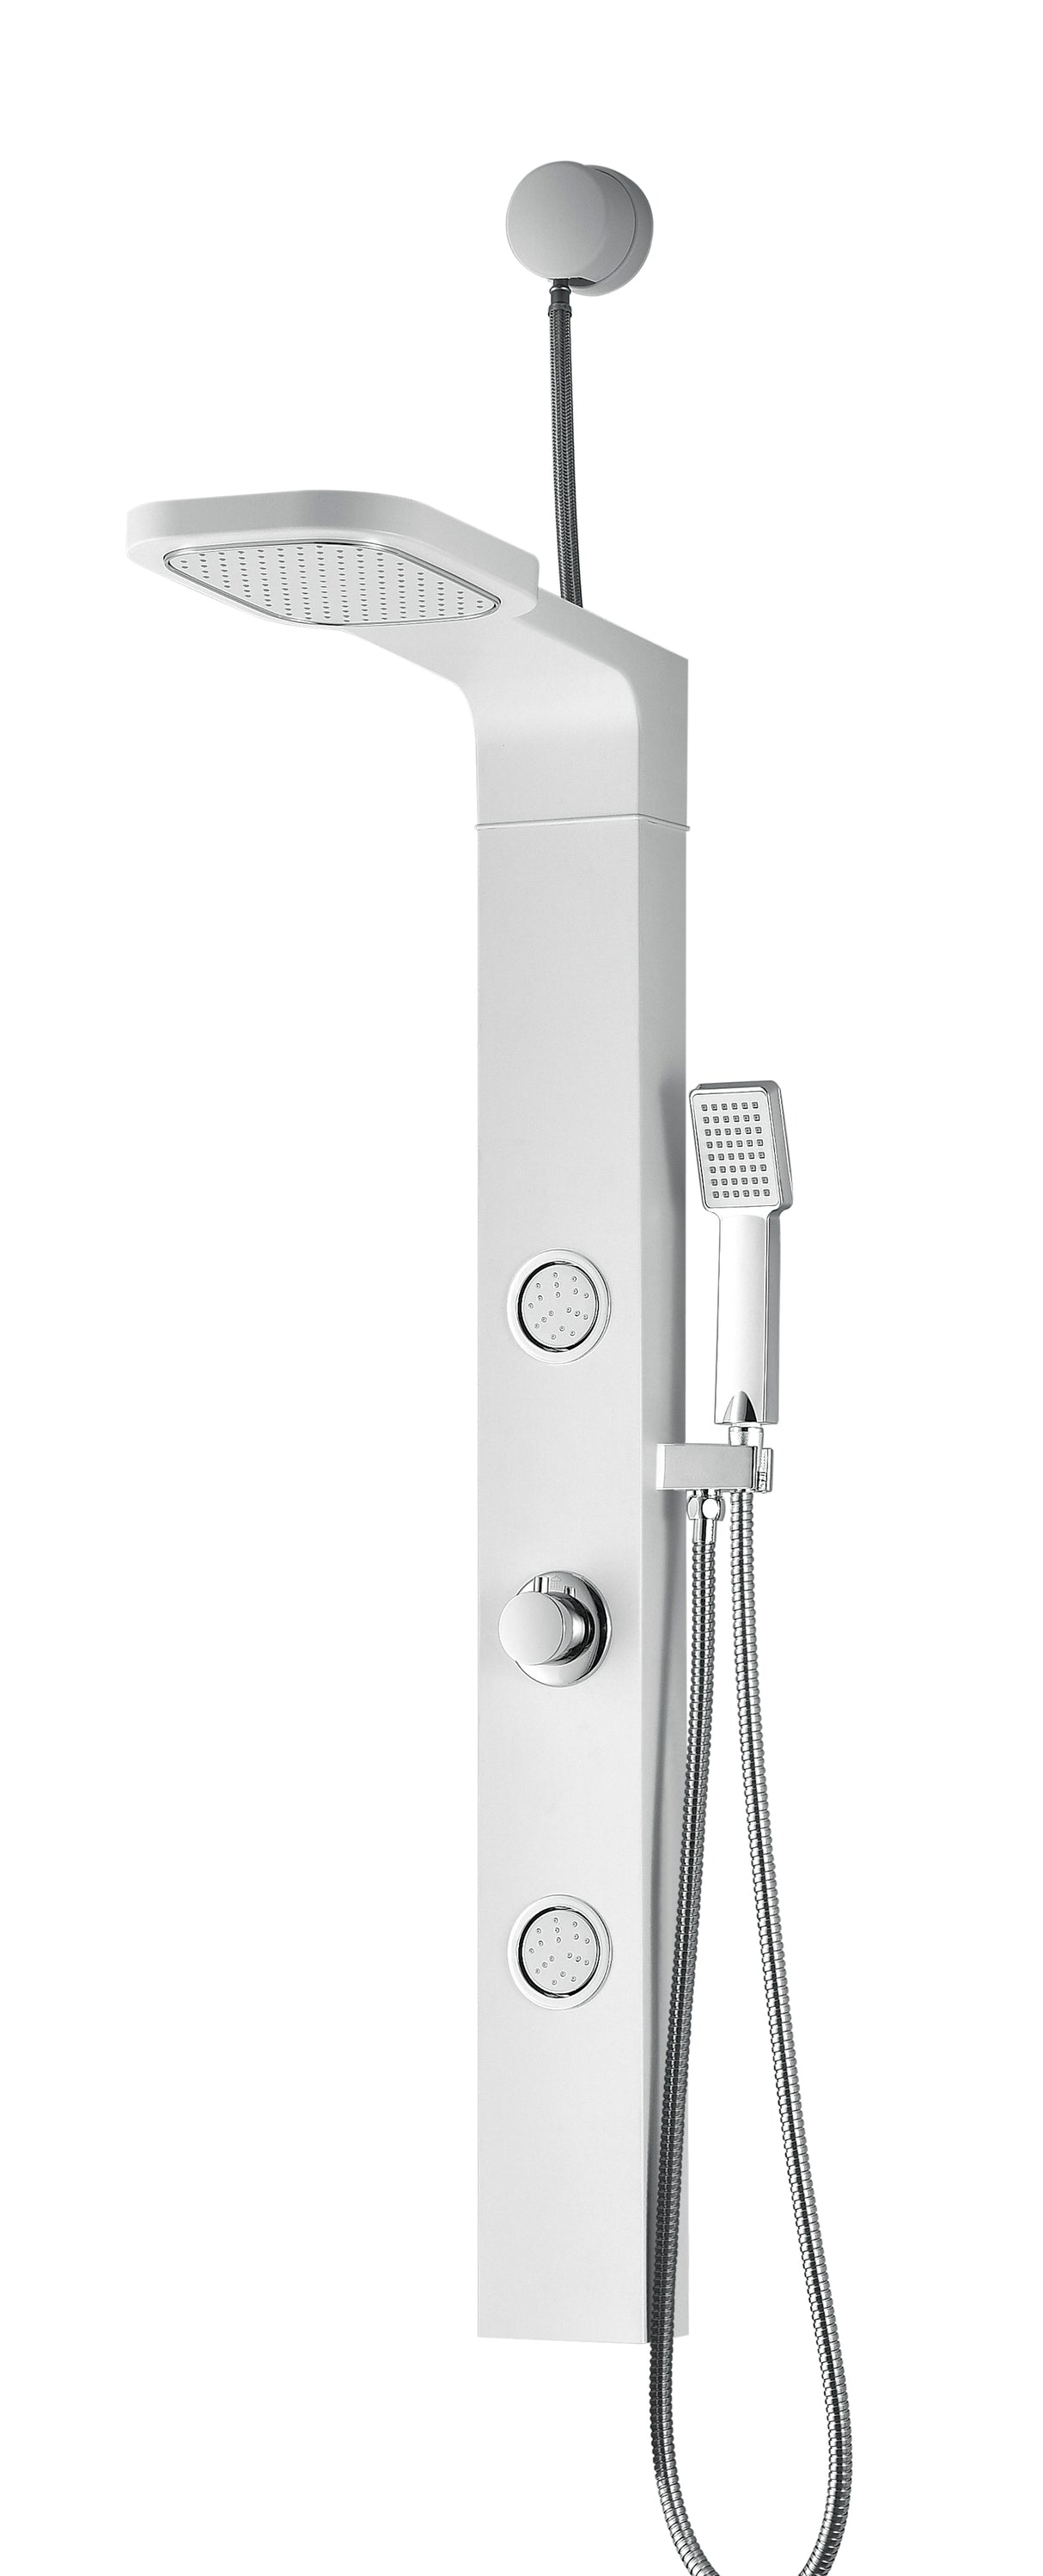 ANZZI SP-AZ8103 Hacienda Series 44 in. Full Body Shower Panel System with Heavy Rain Shower and Spray Wand in White